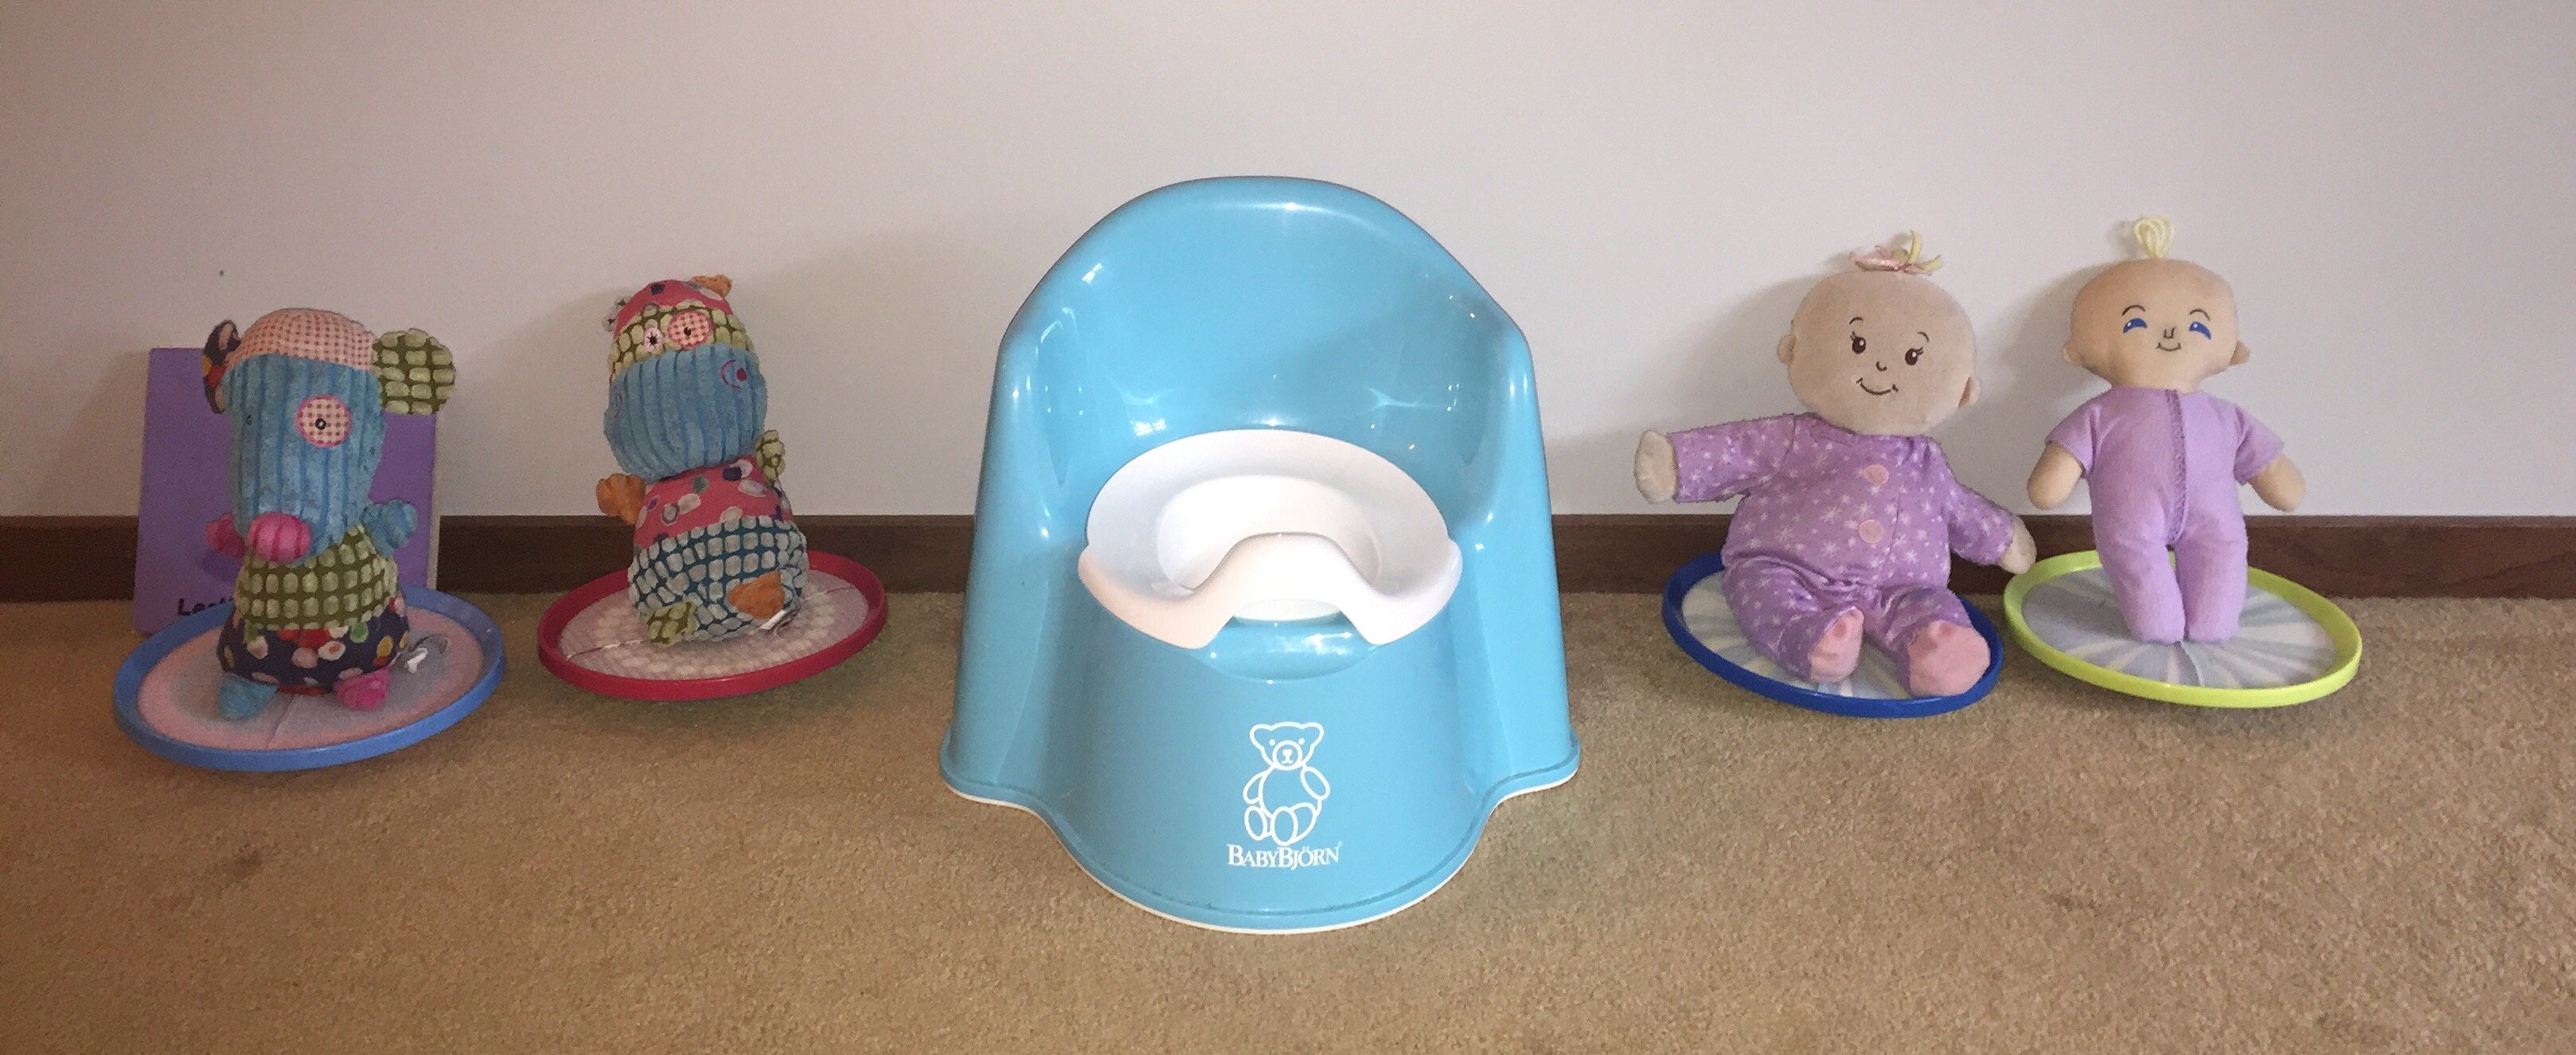 “Oh Crap!”: Our Potty Training Experience